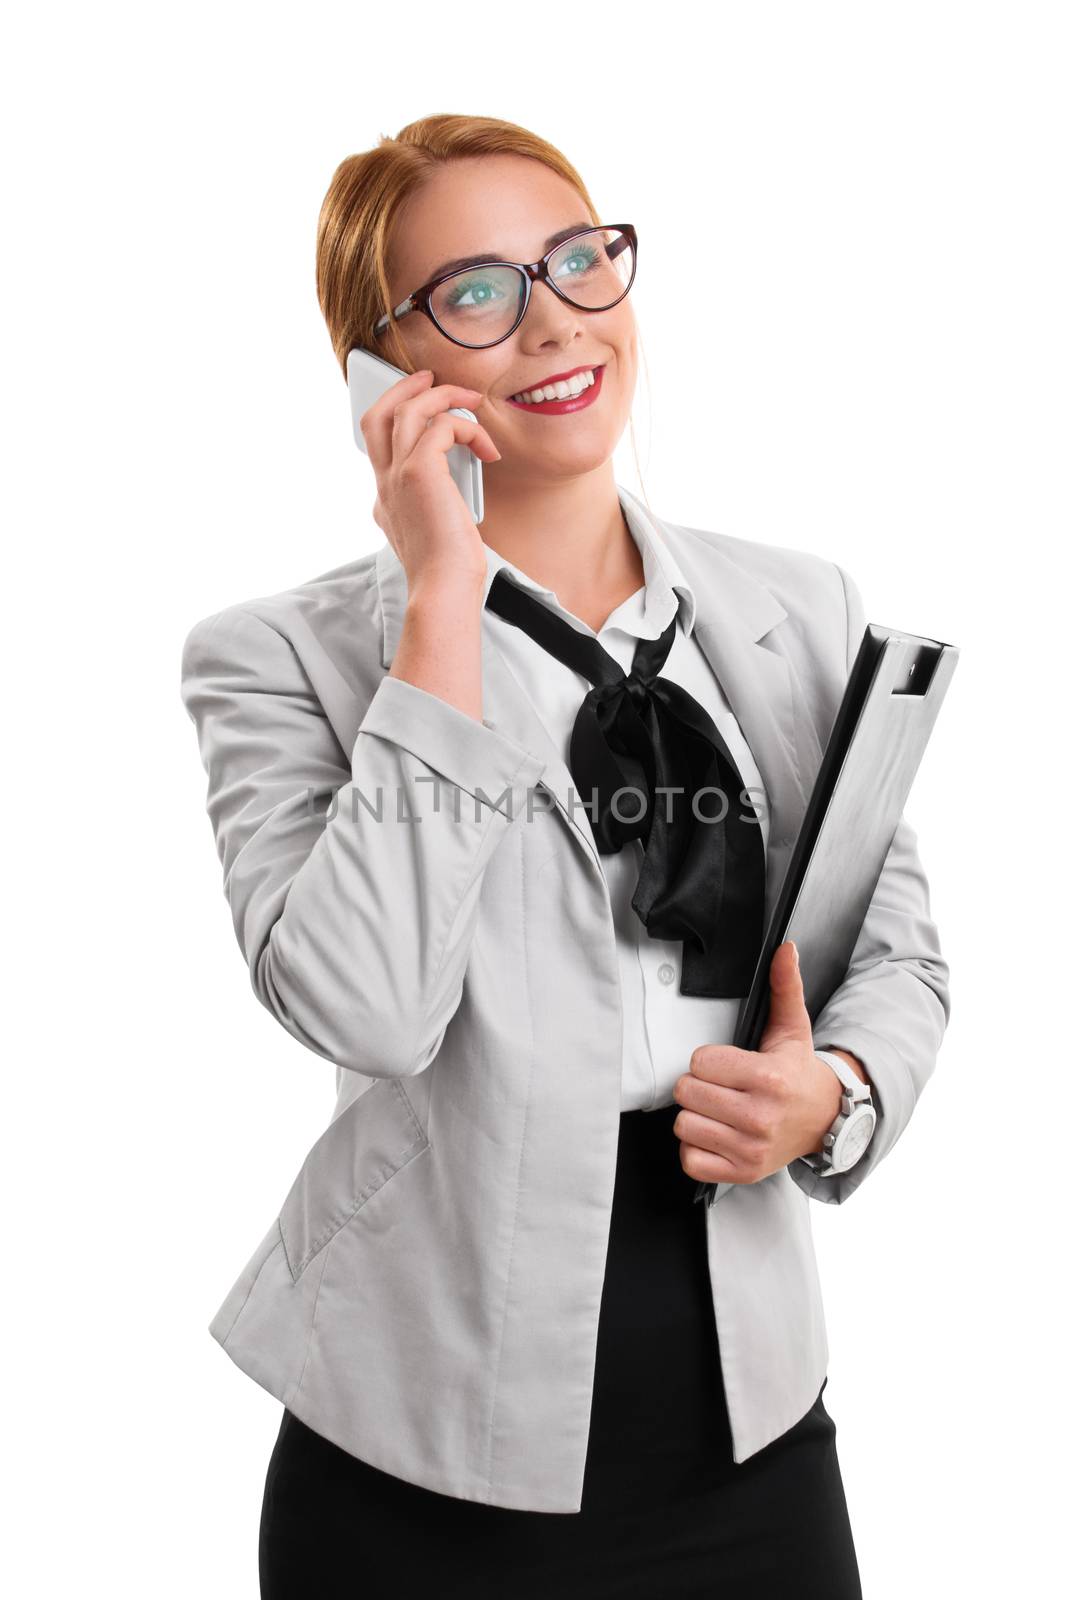 A portrait of a businesswoman talking on the phone, holding a notepad, isolated on white background.